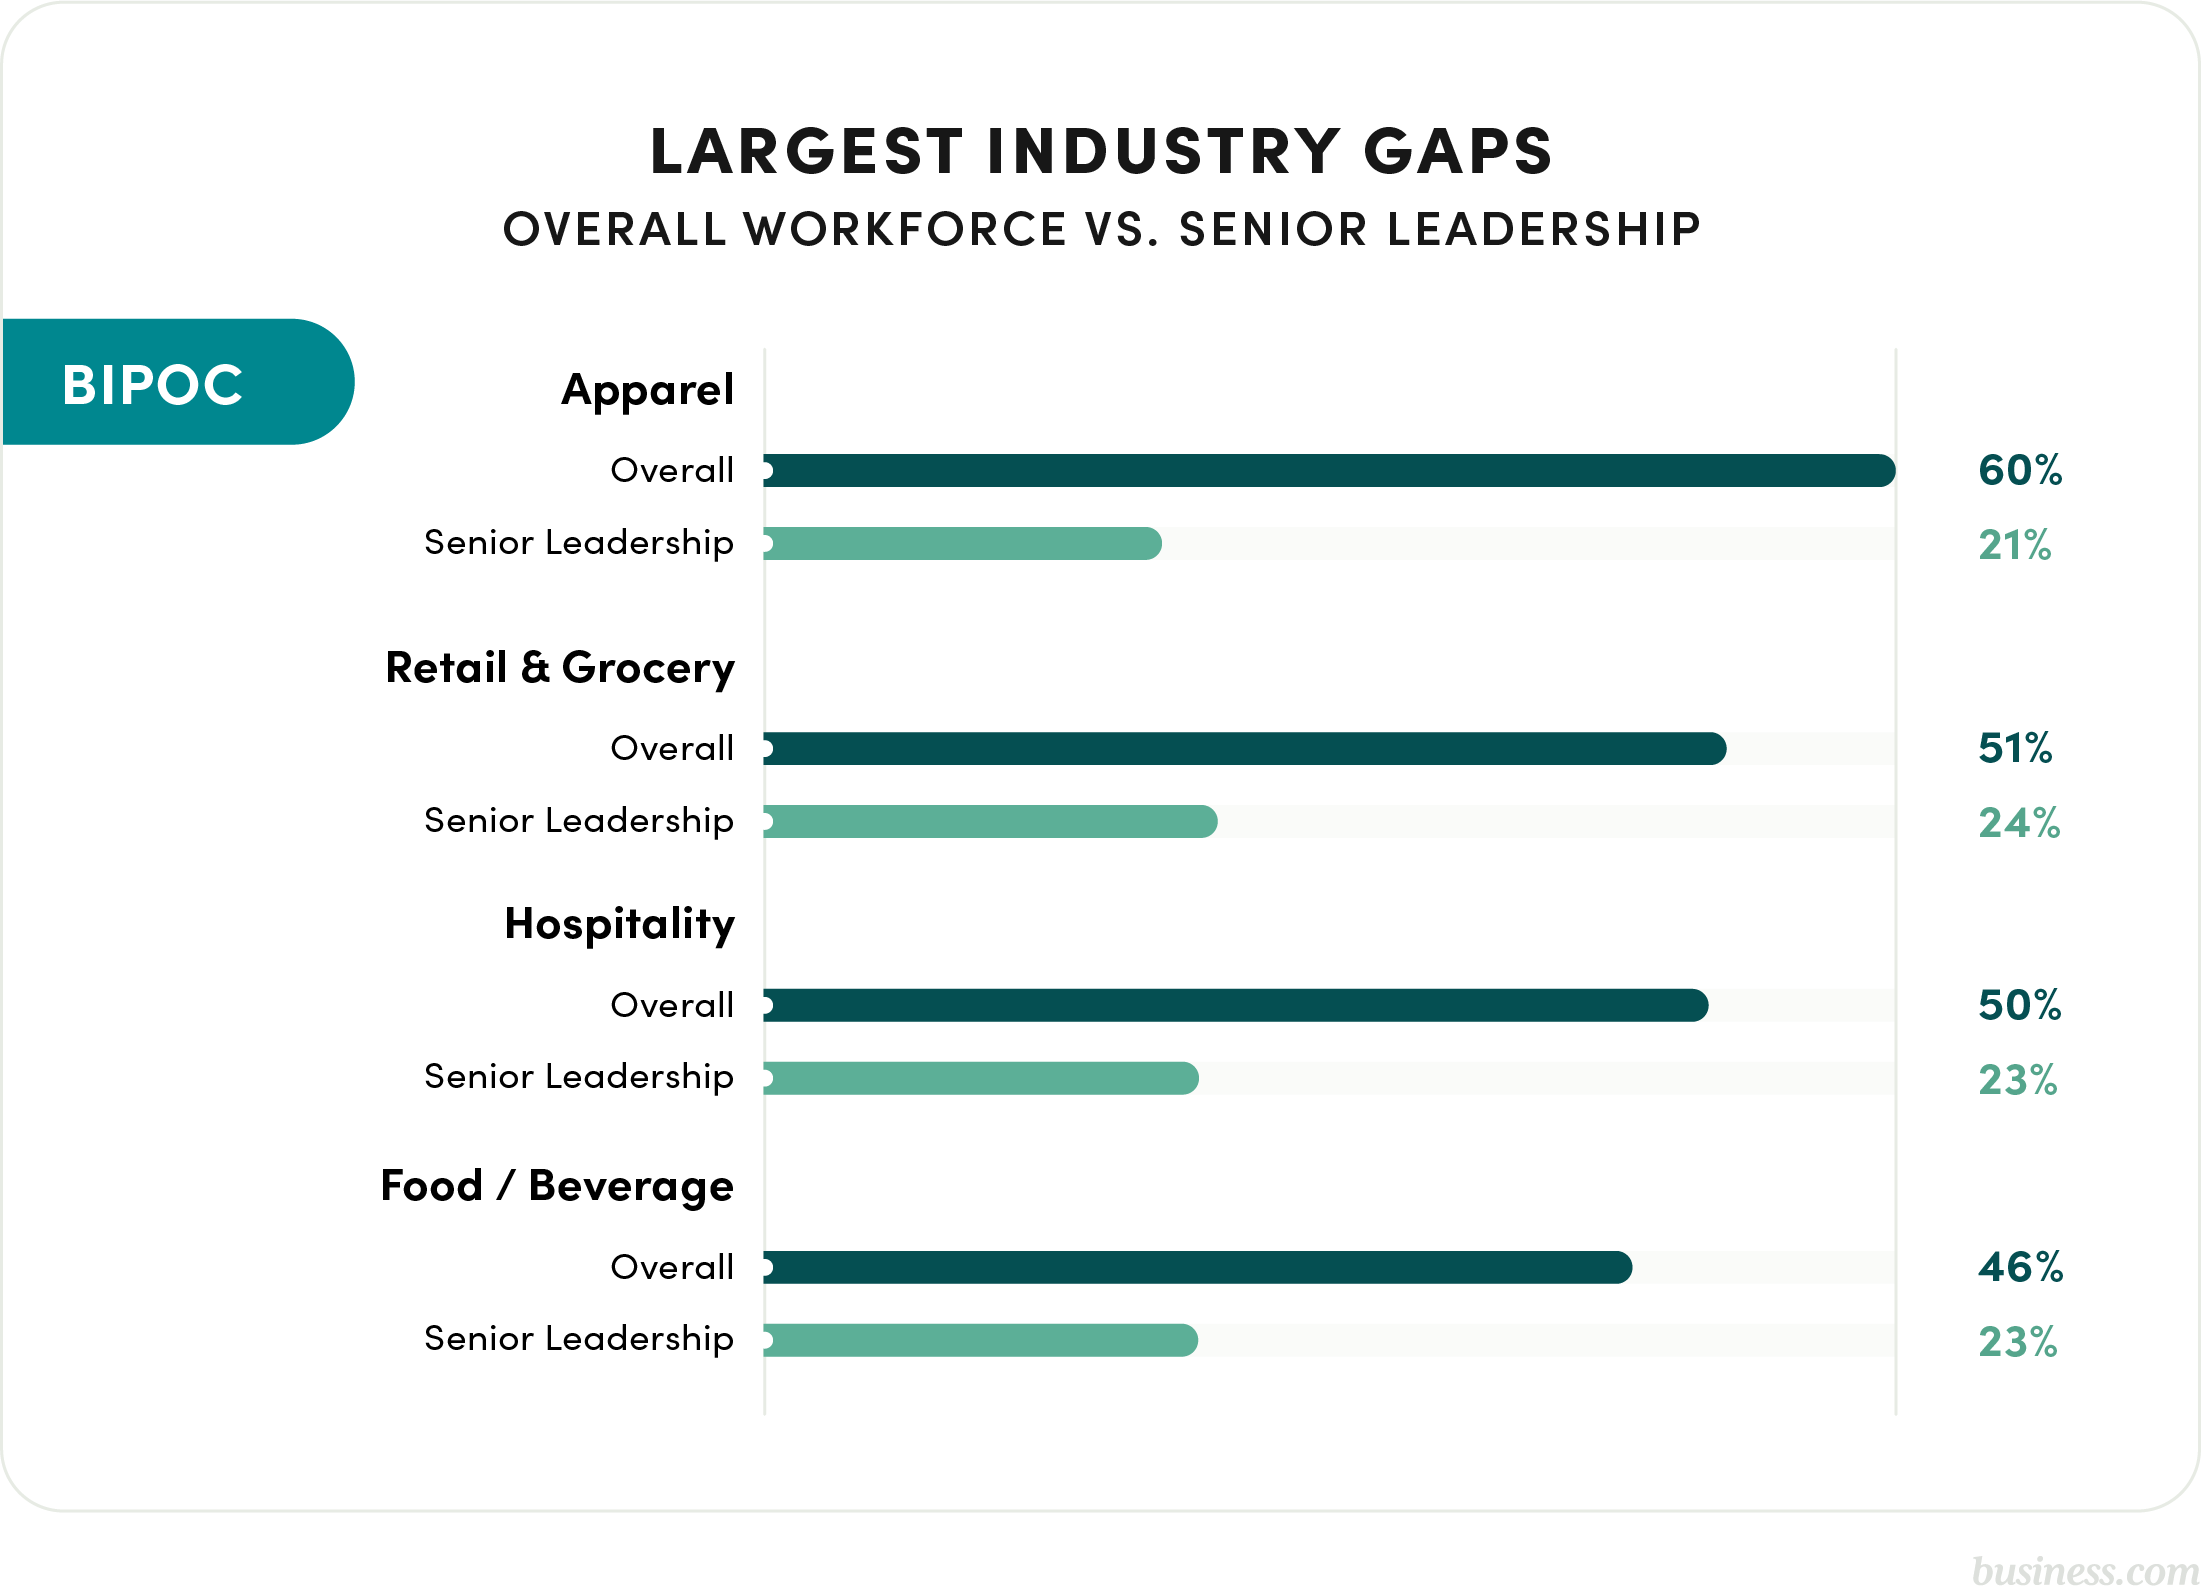 Industry gaps for BIPOC and women